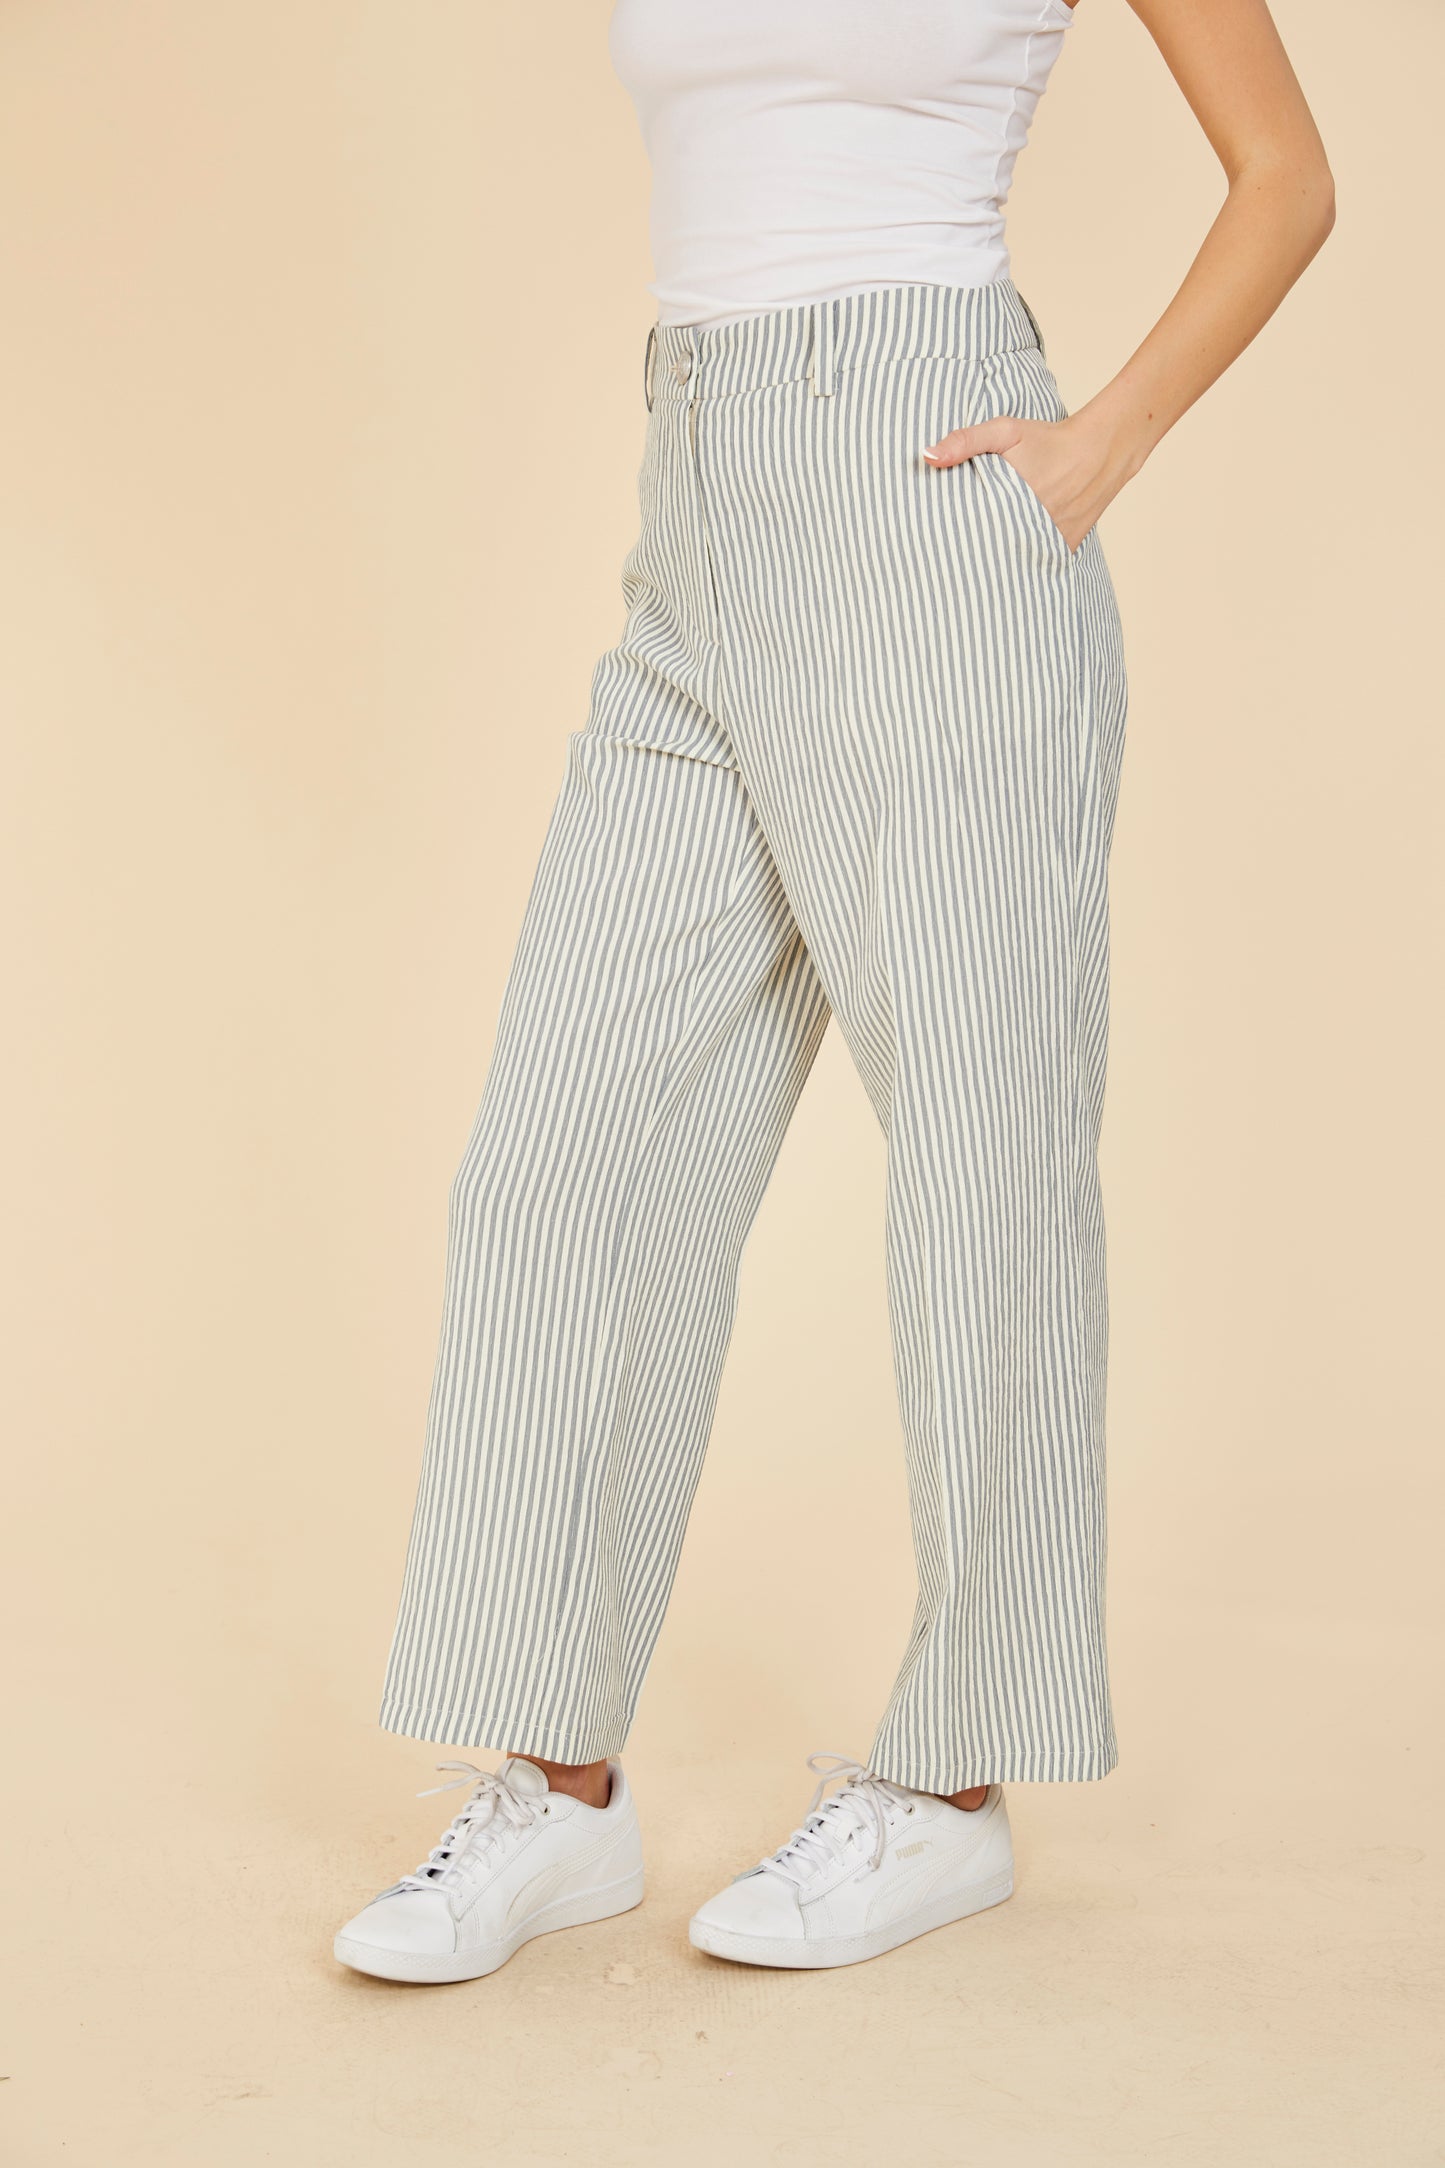 Load image into Gallery viewer, Striped Seer Sucker Pants
